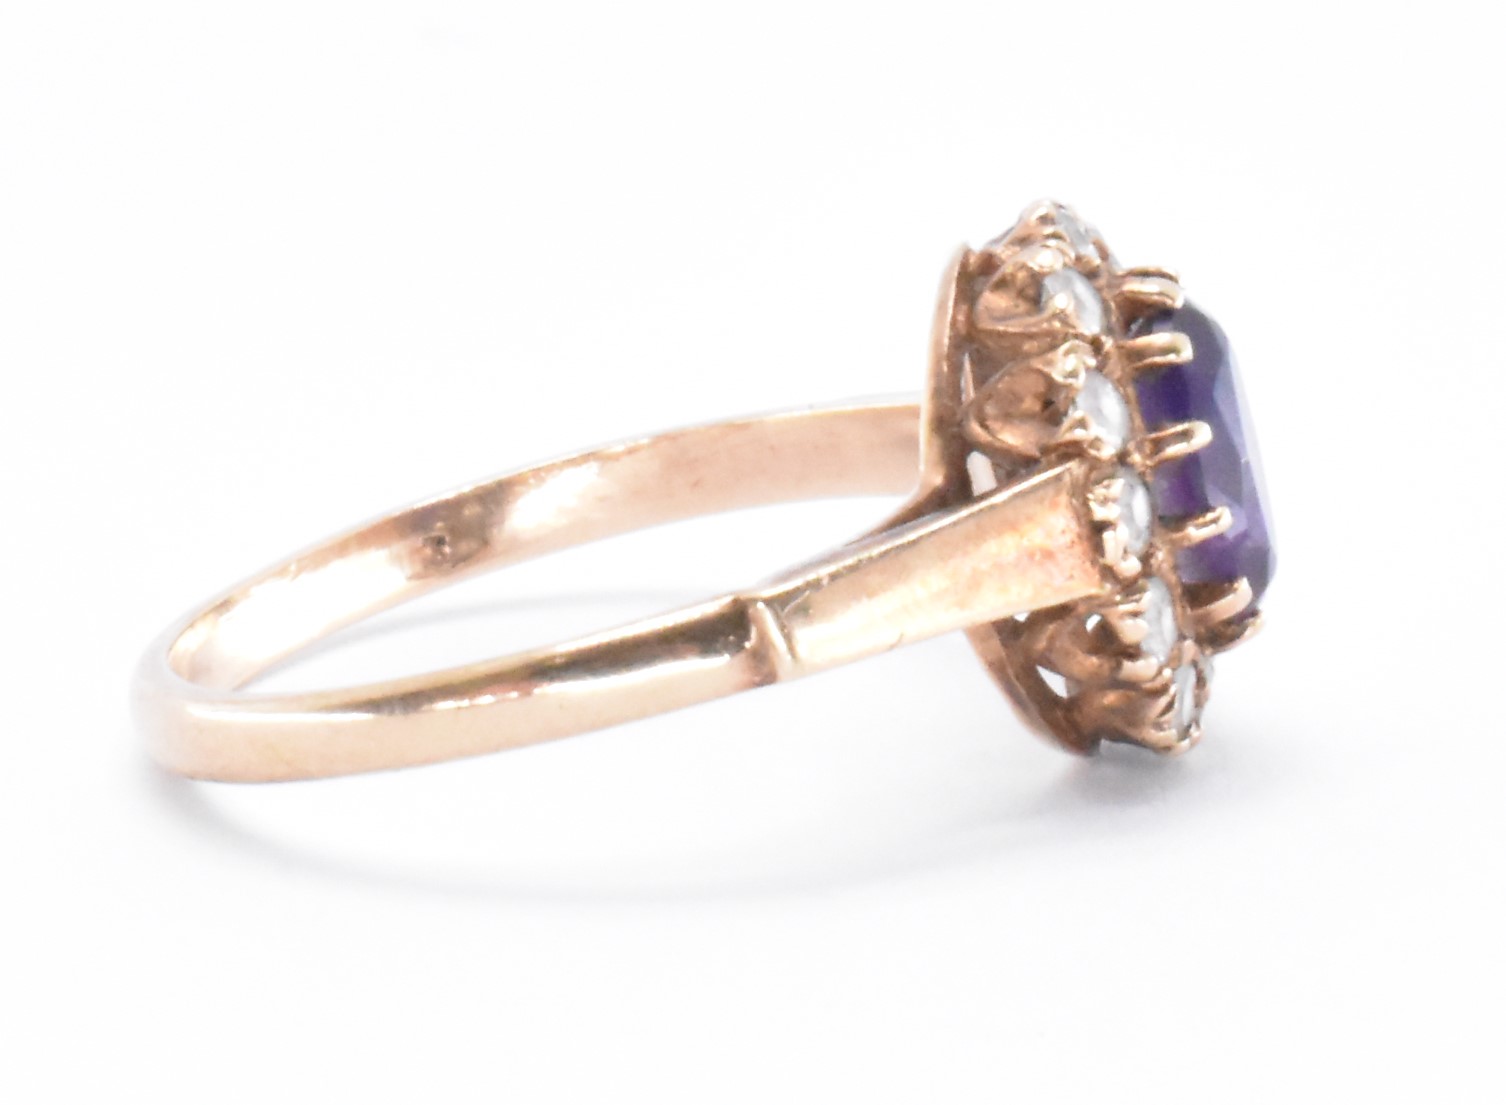 GOLD AMETHYST & WHITE STONE CLUSTER RING - Image 4 of 6